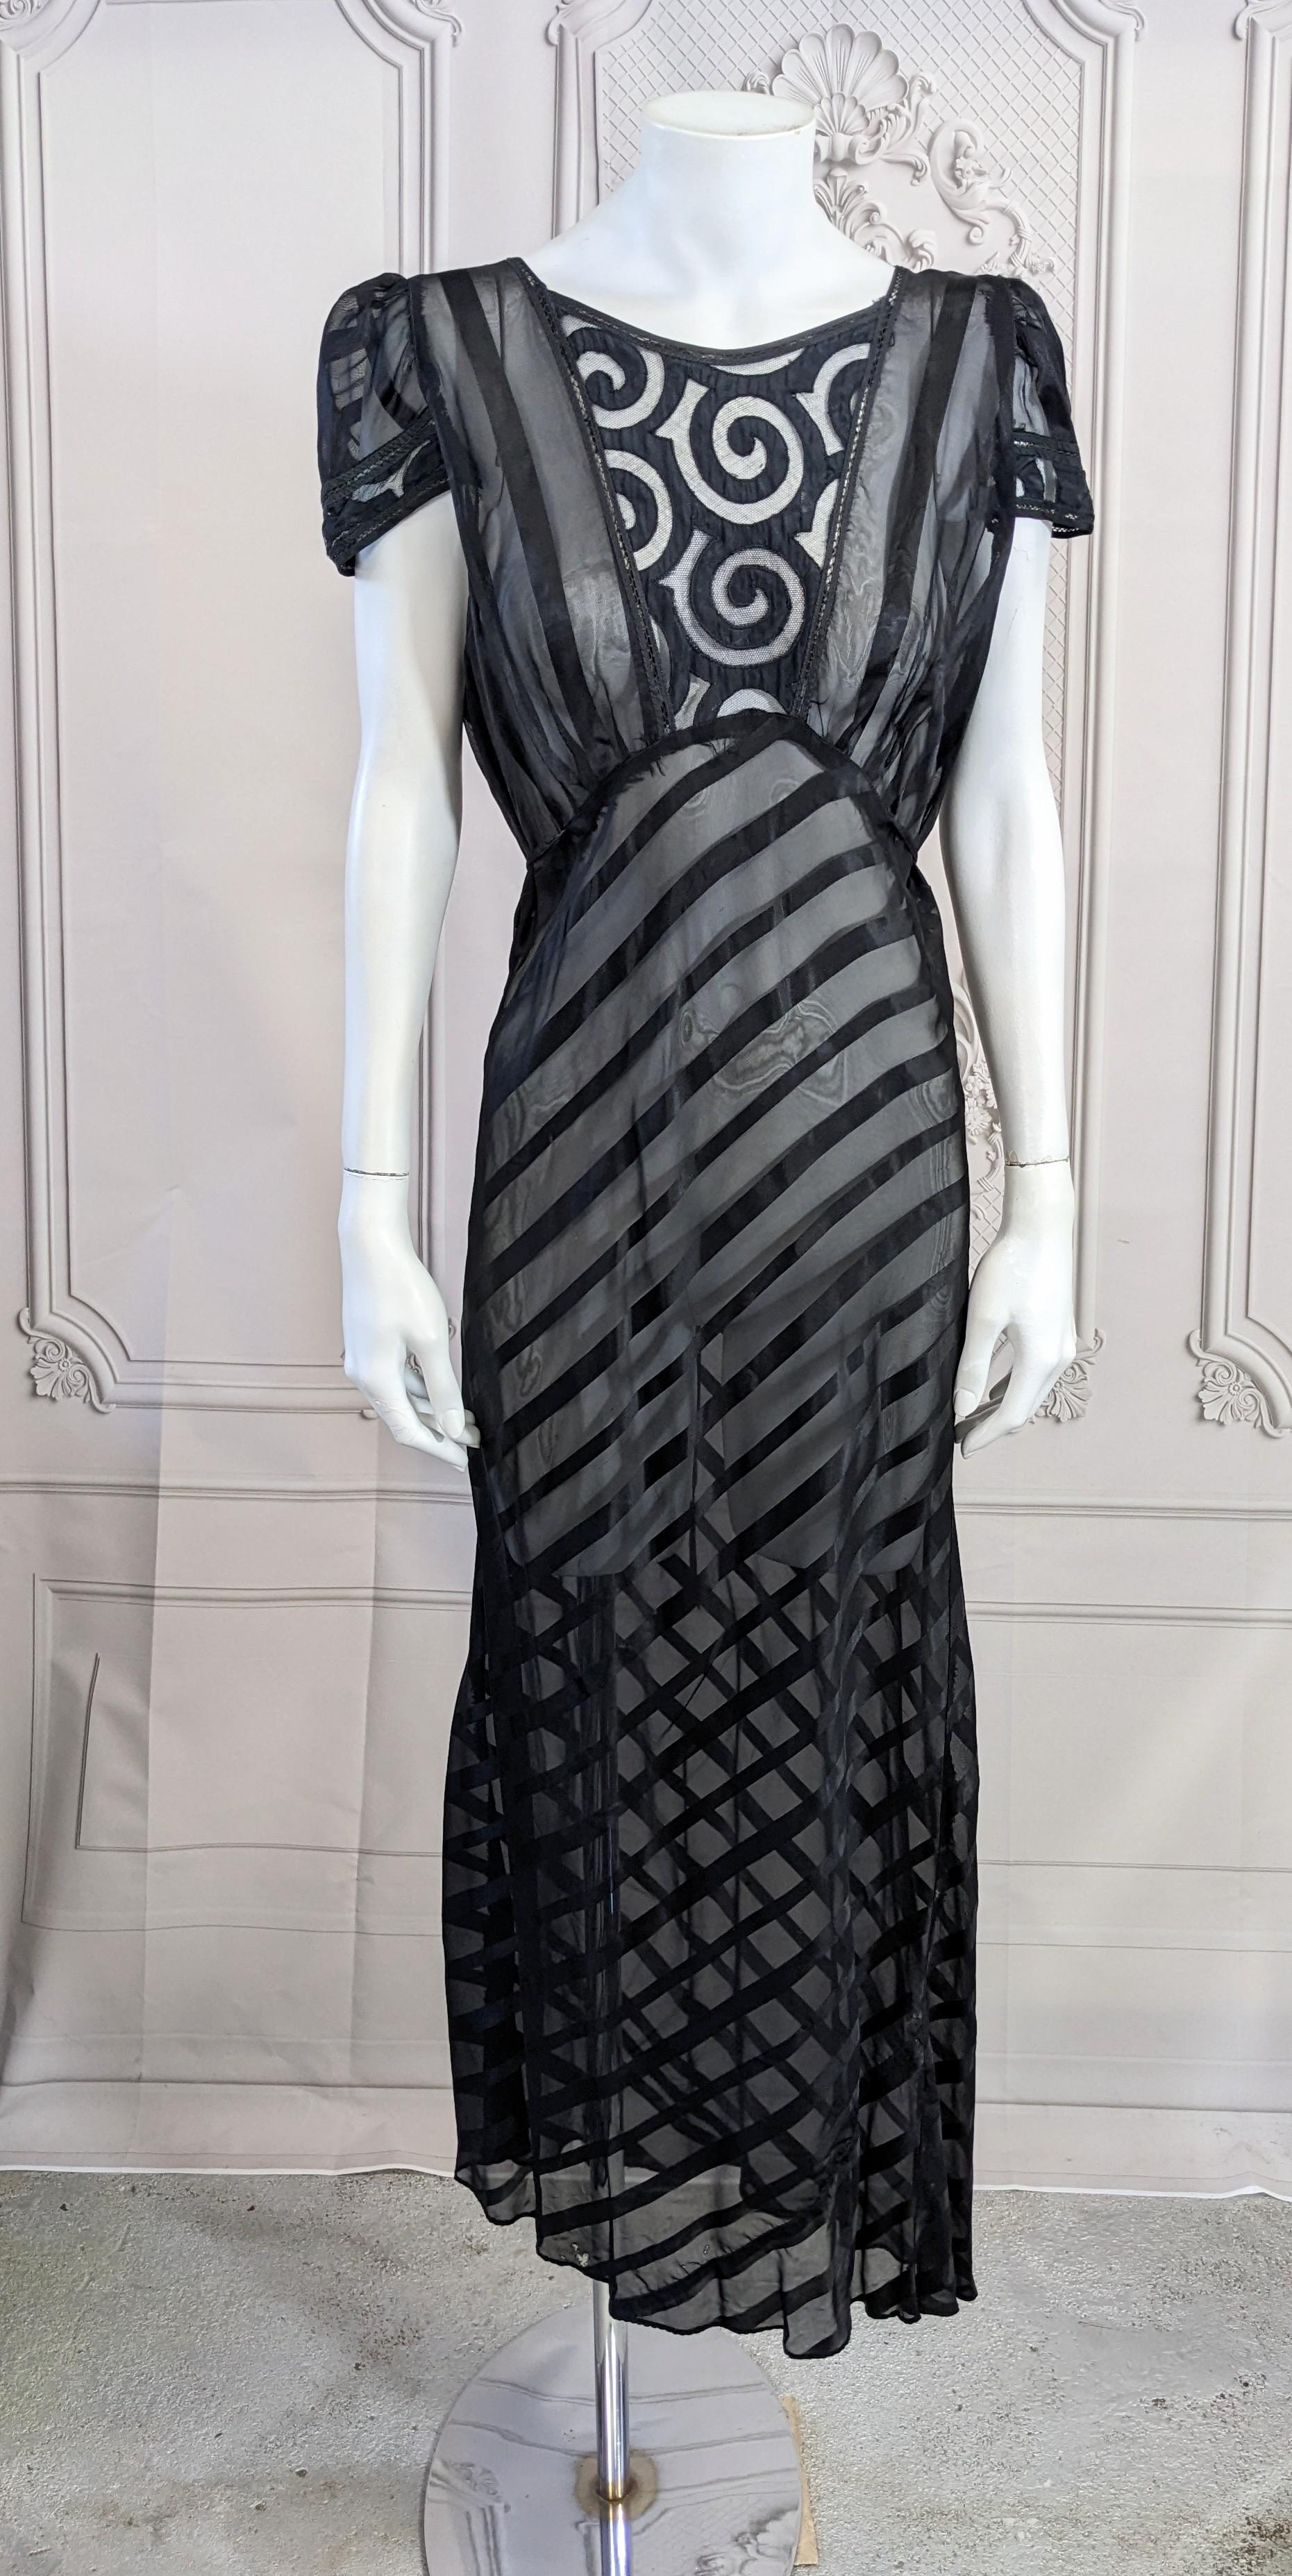 Art Deco Rayon Shadow Stripe Slip Dress from the 1930's. Shadow stripe rayon chiffon cut on the bias with embroidered tulle swirl panels on bodice and sleeves. Slips over head, no closures with back ties. 
Size S-M. 1930's USA. 